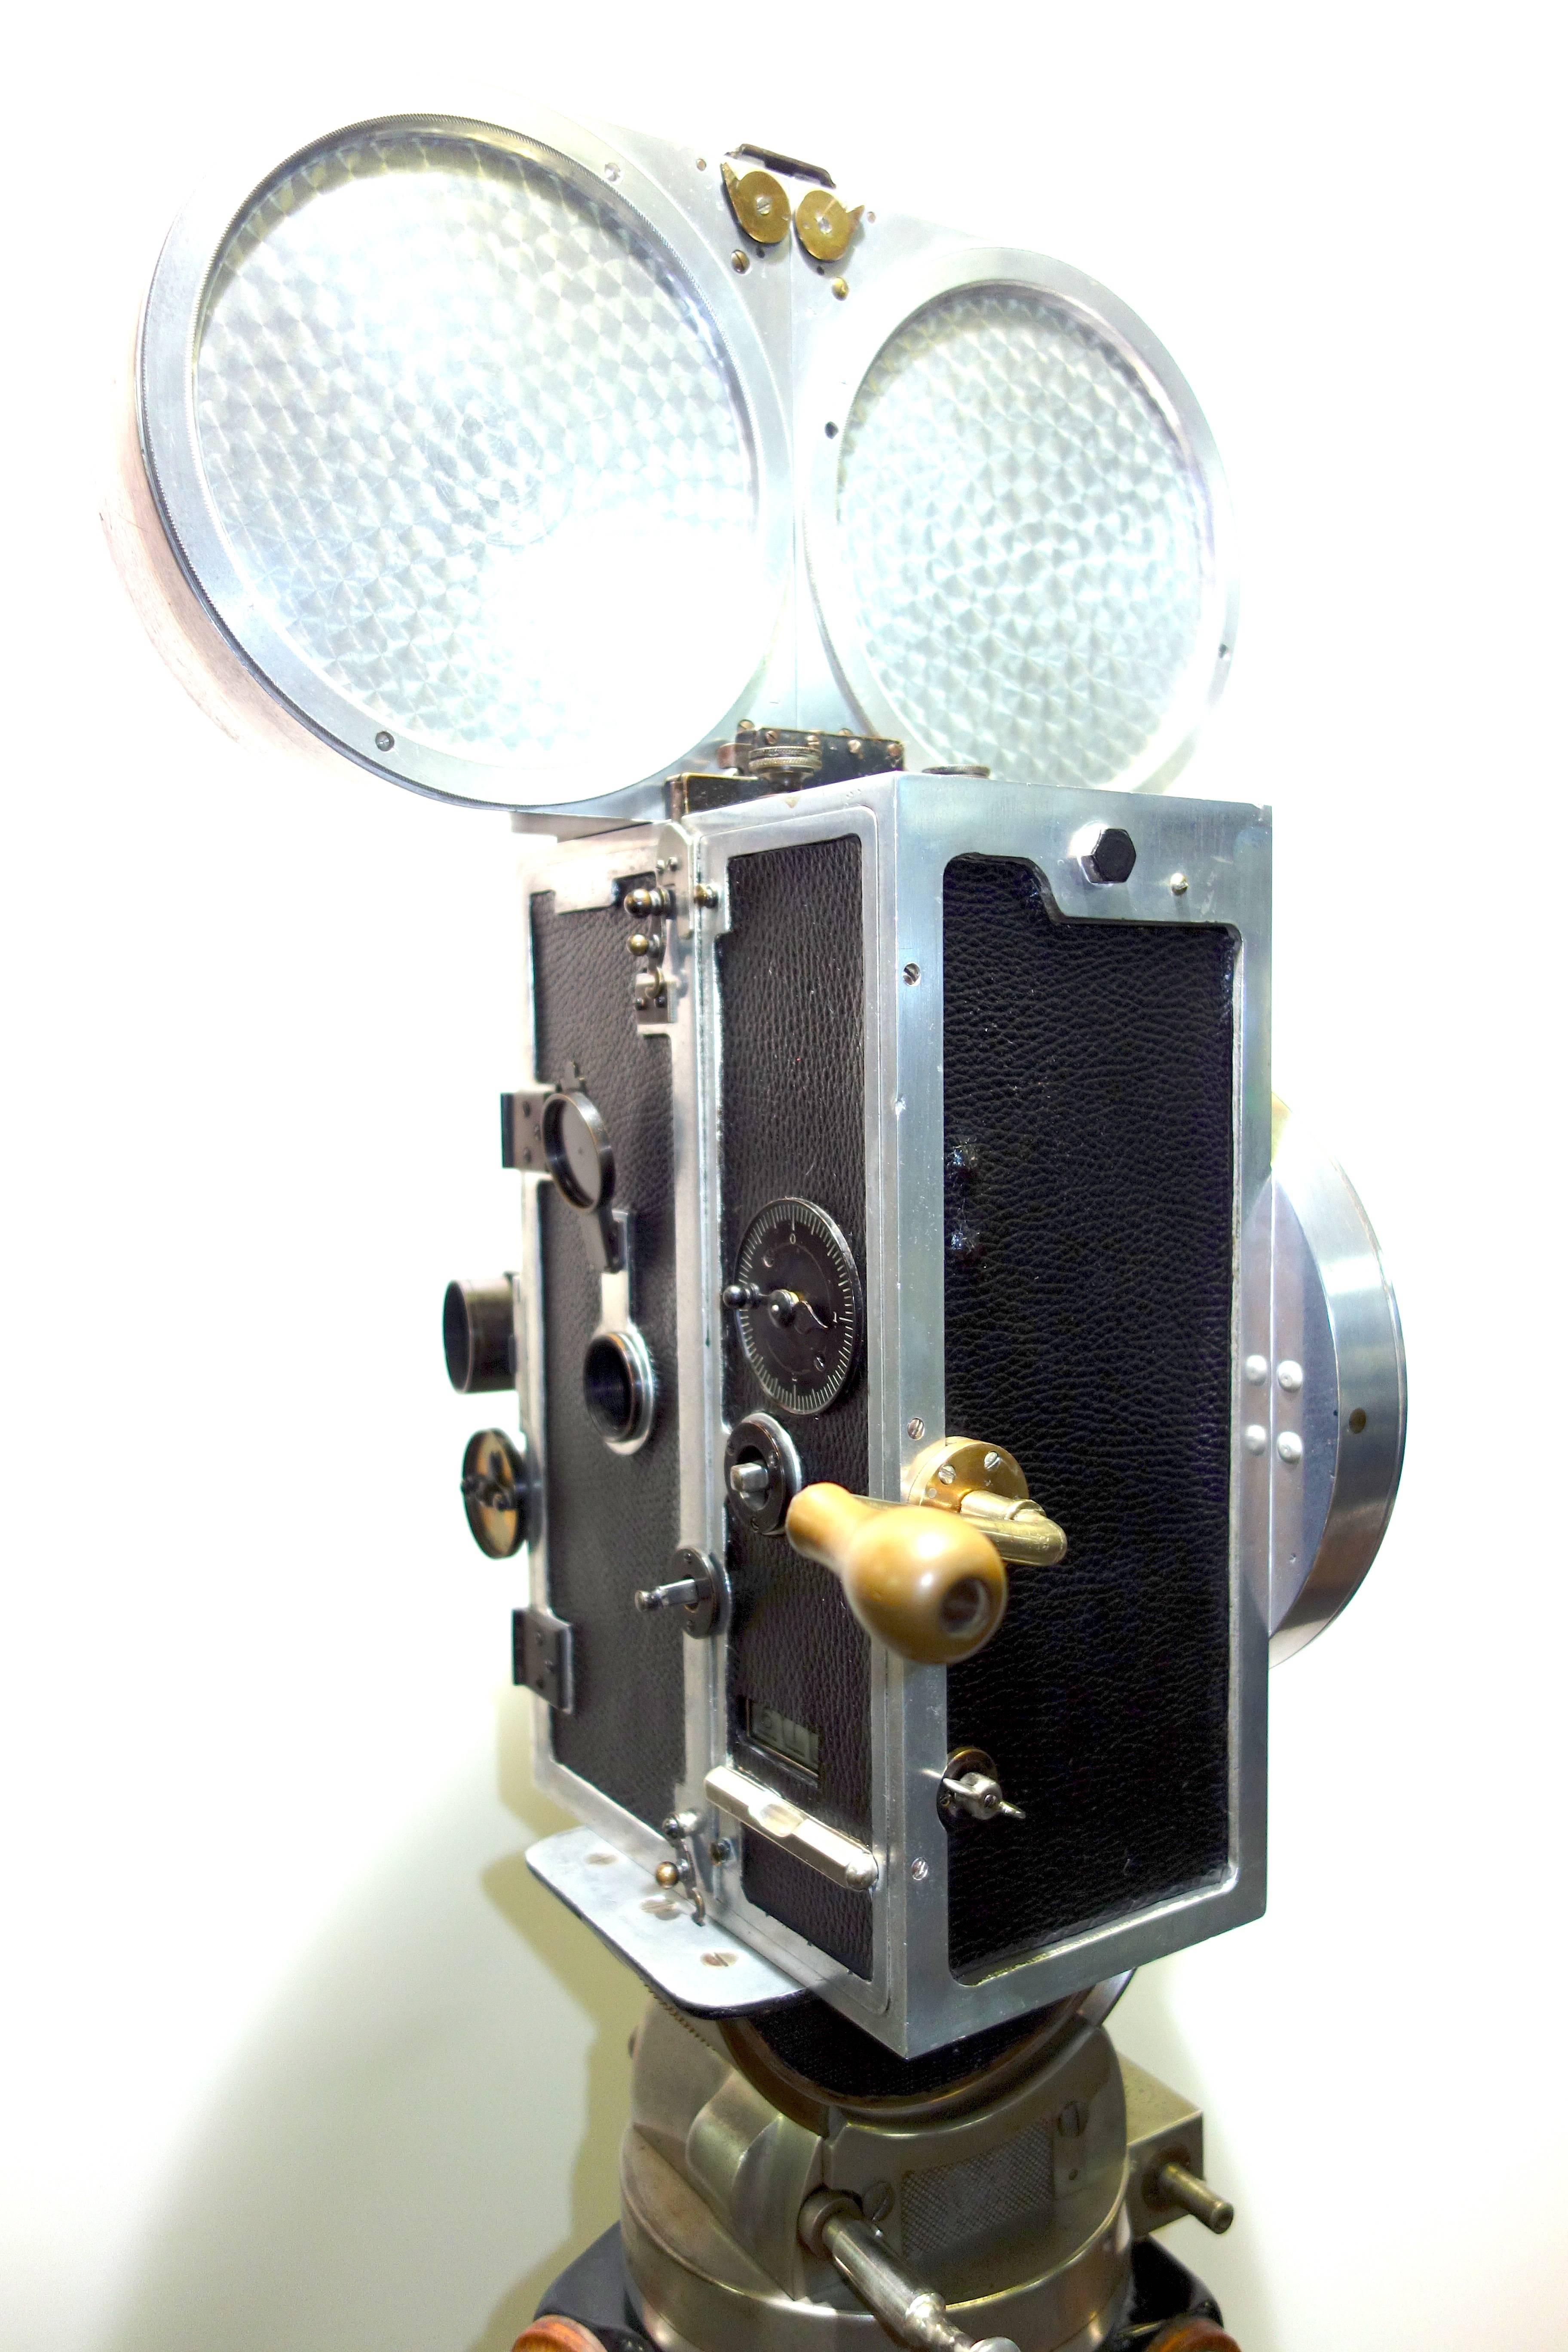 American Wilart, 35mm Cinema Camera, One Off Factory Prototype, Circa 1919. As Sculpture. For Sale